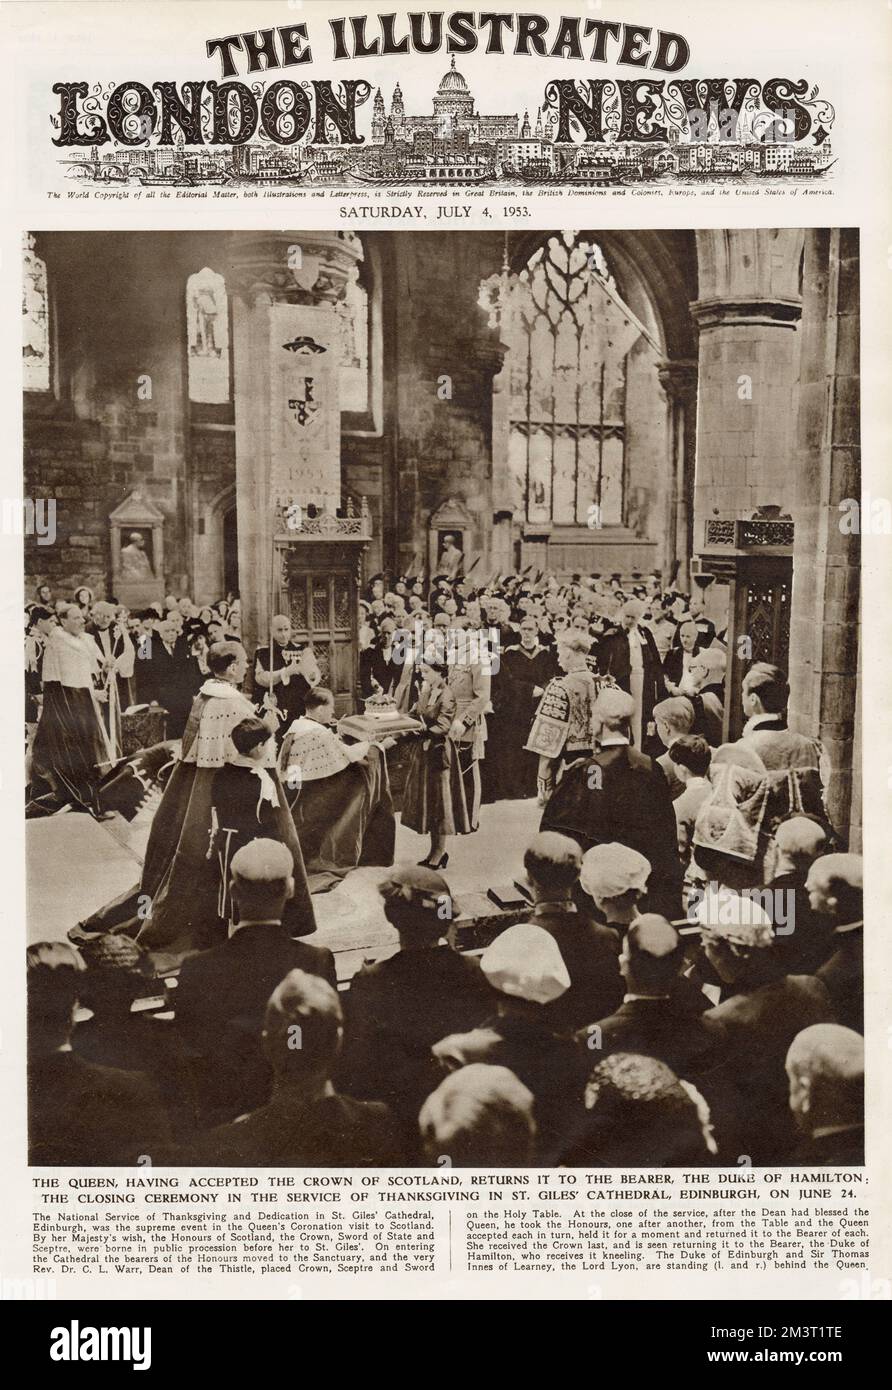 Queen Elizabeth II accepts the 'Honours of Scotland' (the Scottish Crown Jewels) at the National Service of Thanksgiving and Dedication at St Giles' Cathedral, Edinburgh, June 24, 1953. She returns the Crown of Scotland to the Duke of Hamilton. Stock Photo